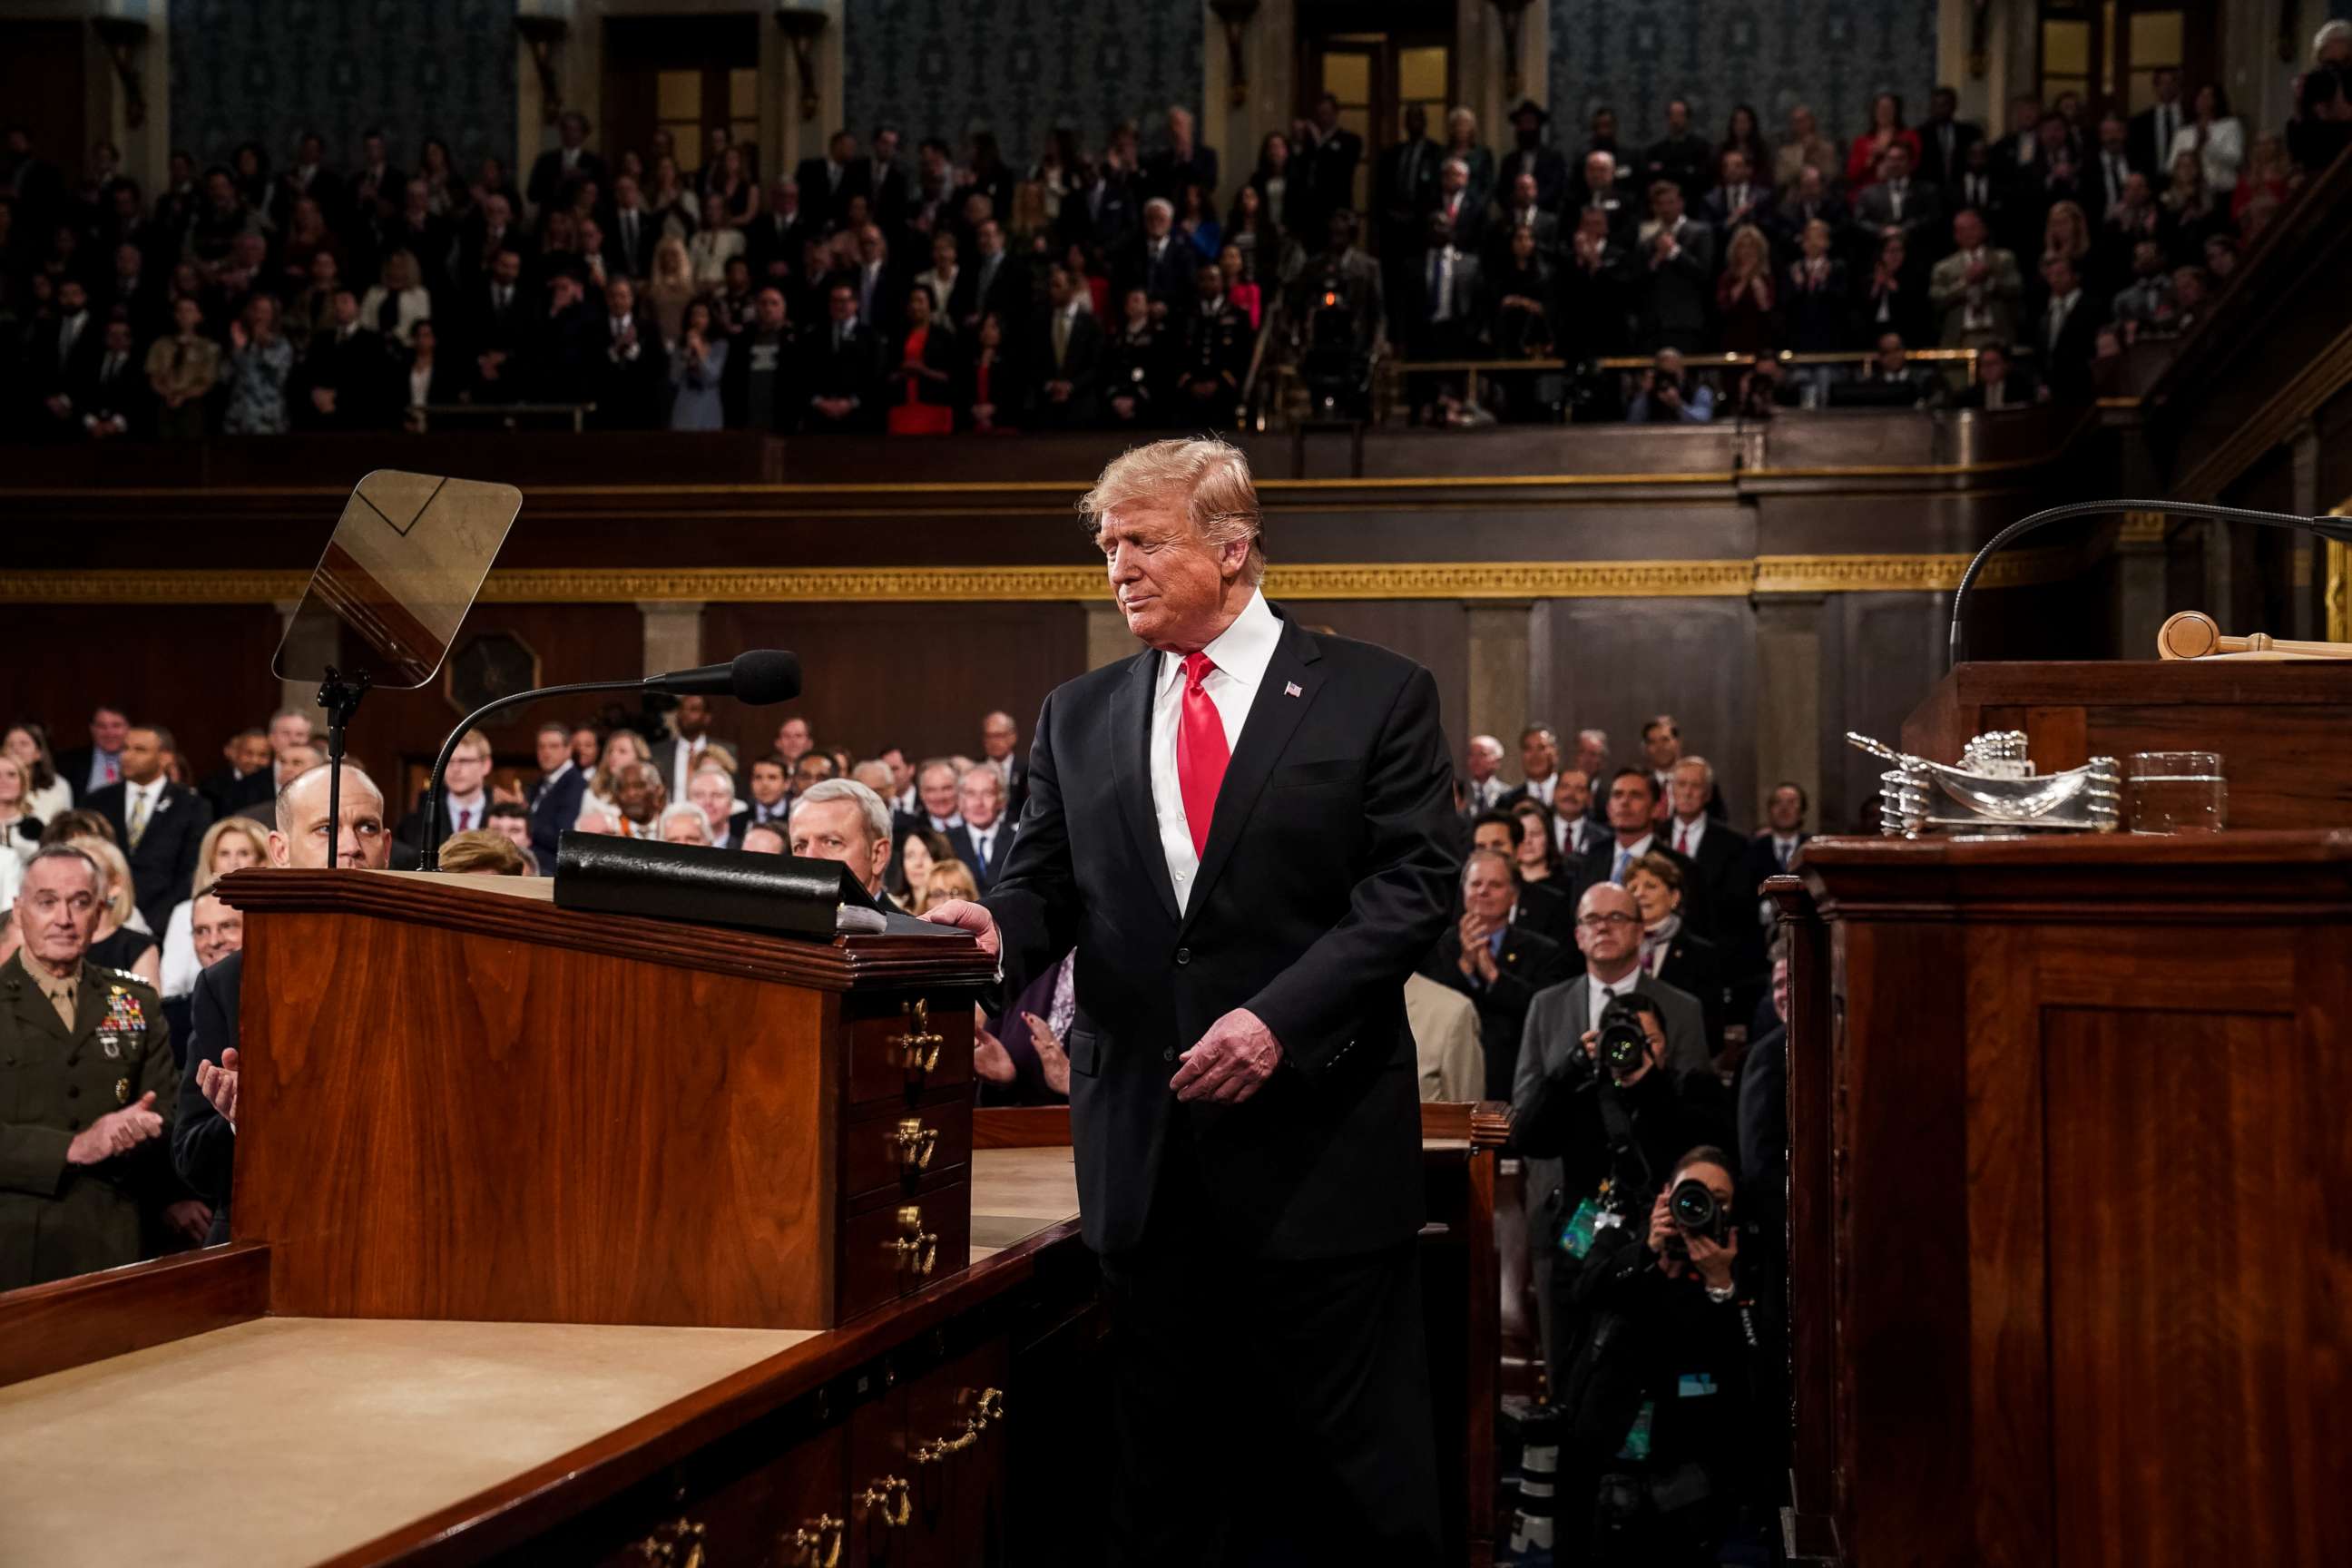 PHOTO: President Donald Trump arrives to deliver the State of the Union address in the U.S. Capitol Building on Feb. 5, 2019, in Washington.